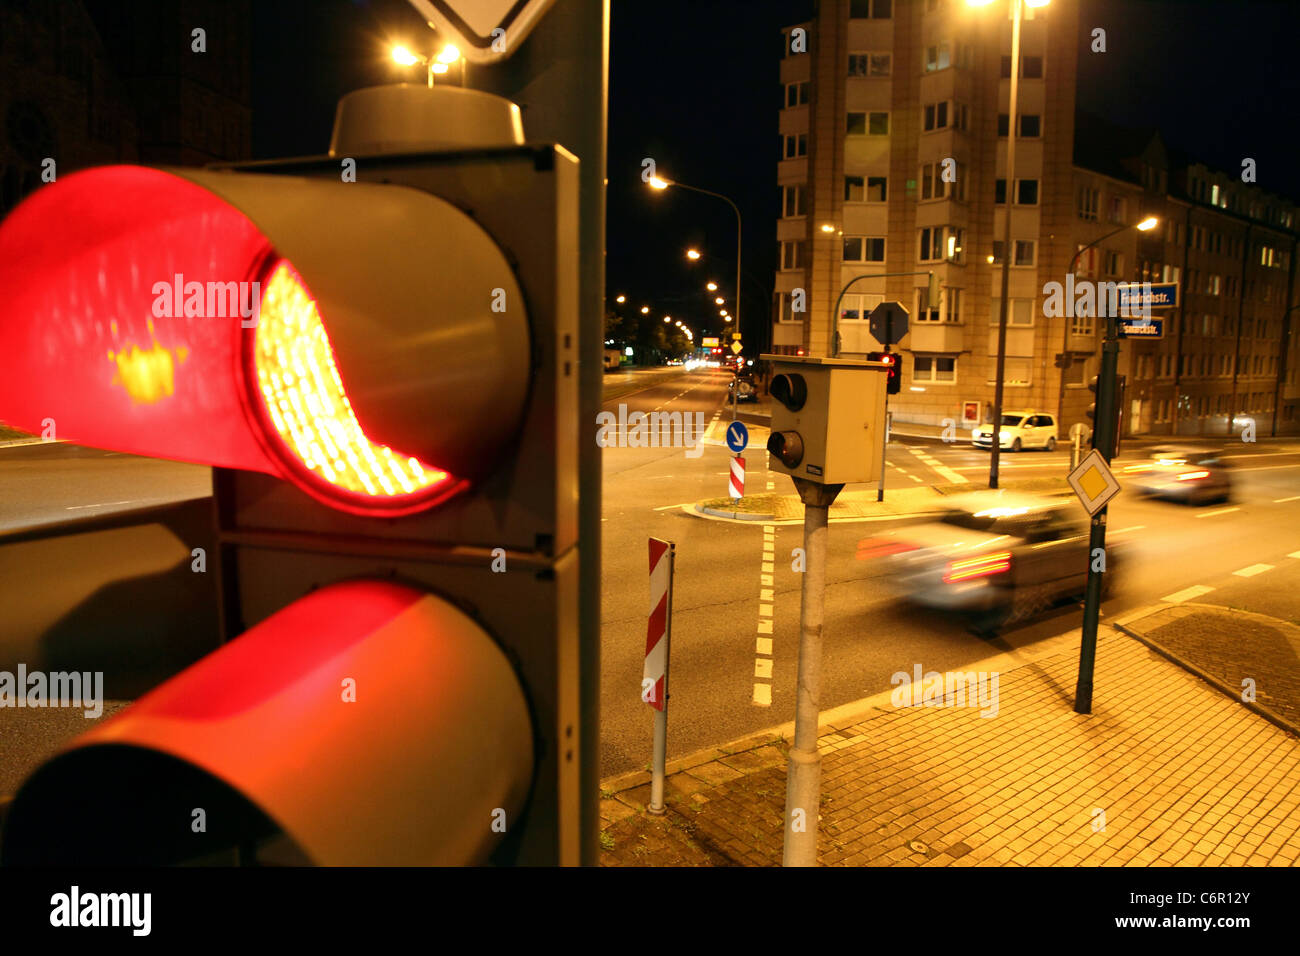 Traffic camera, at a traffic light, inner city street crossing, controls cars driving over red light signal. Stock Photo